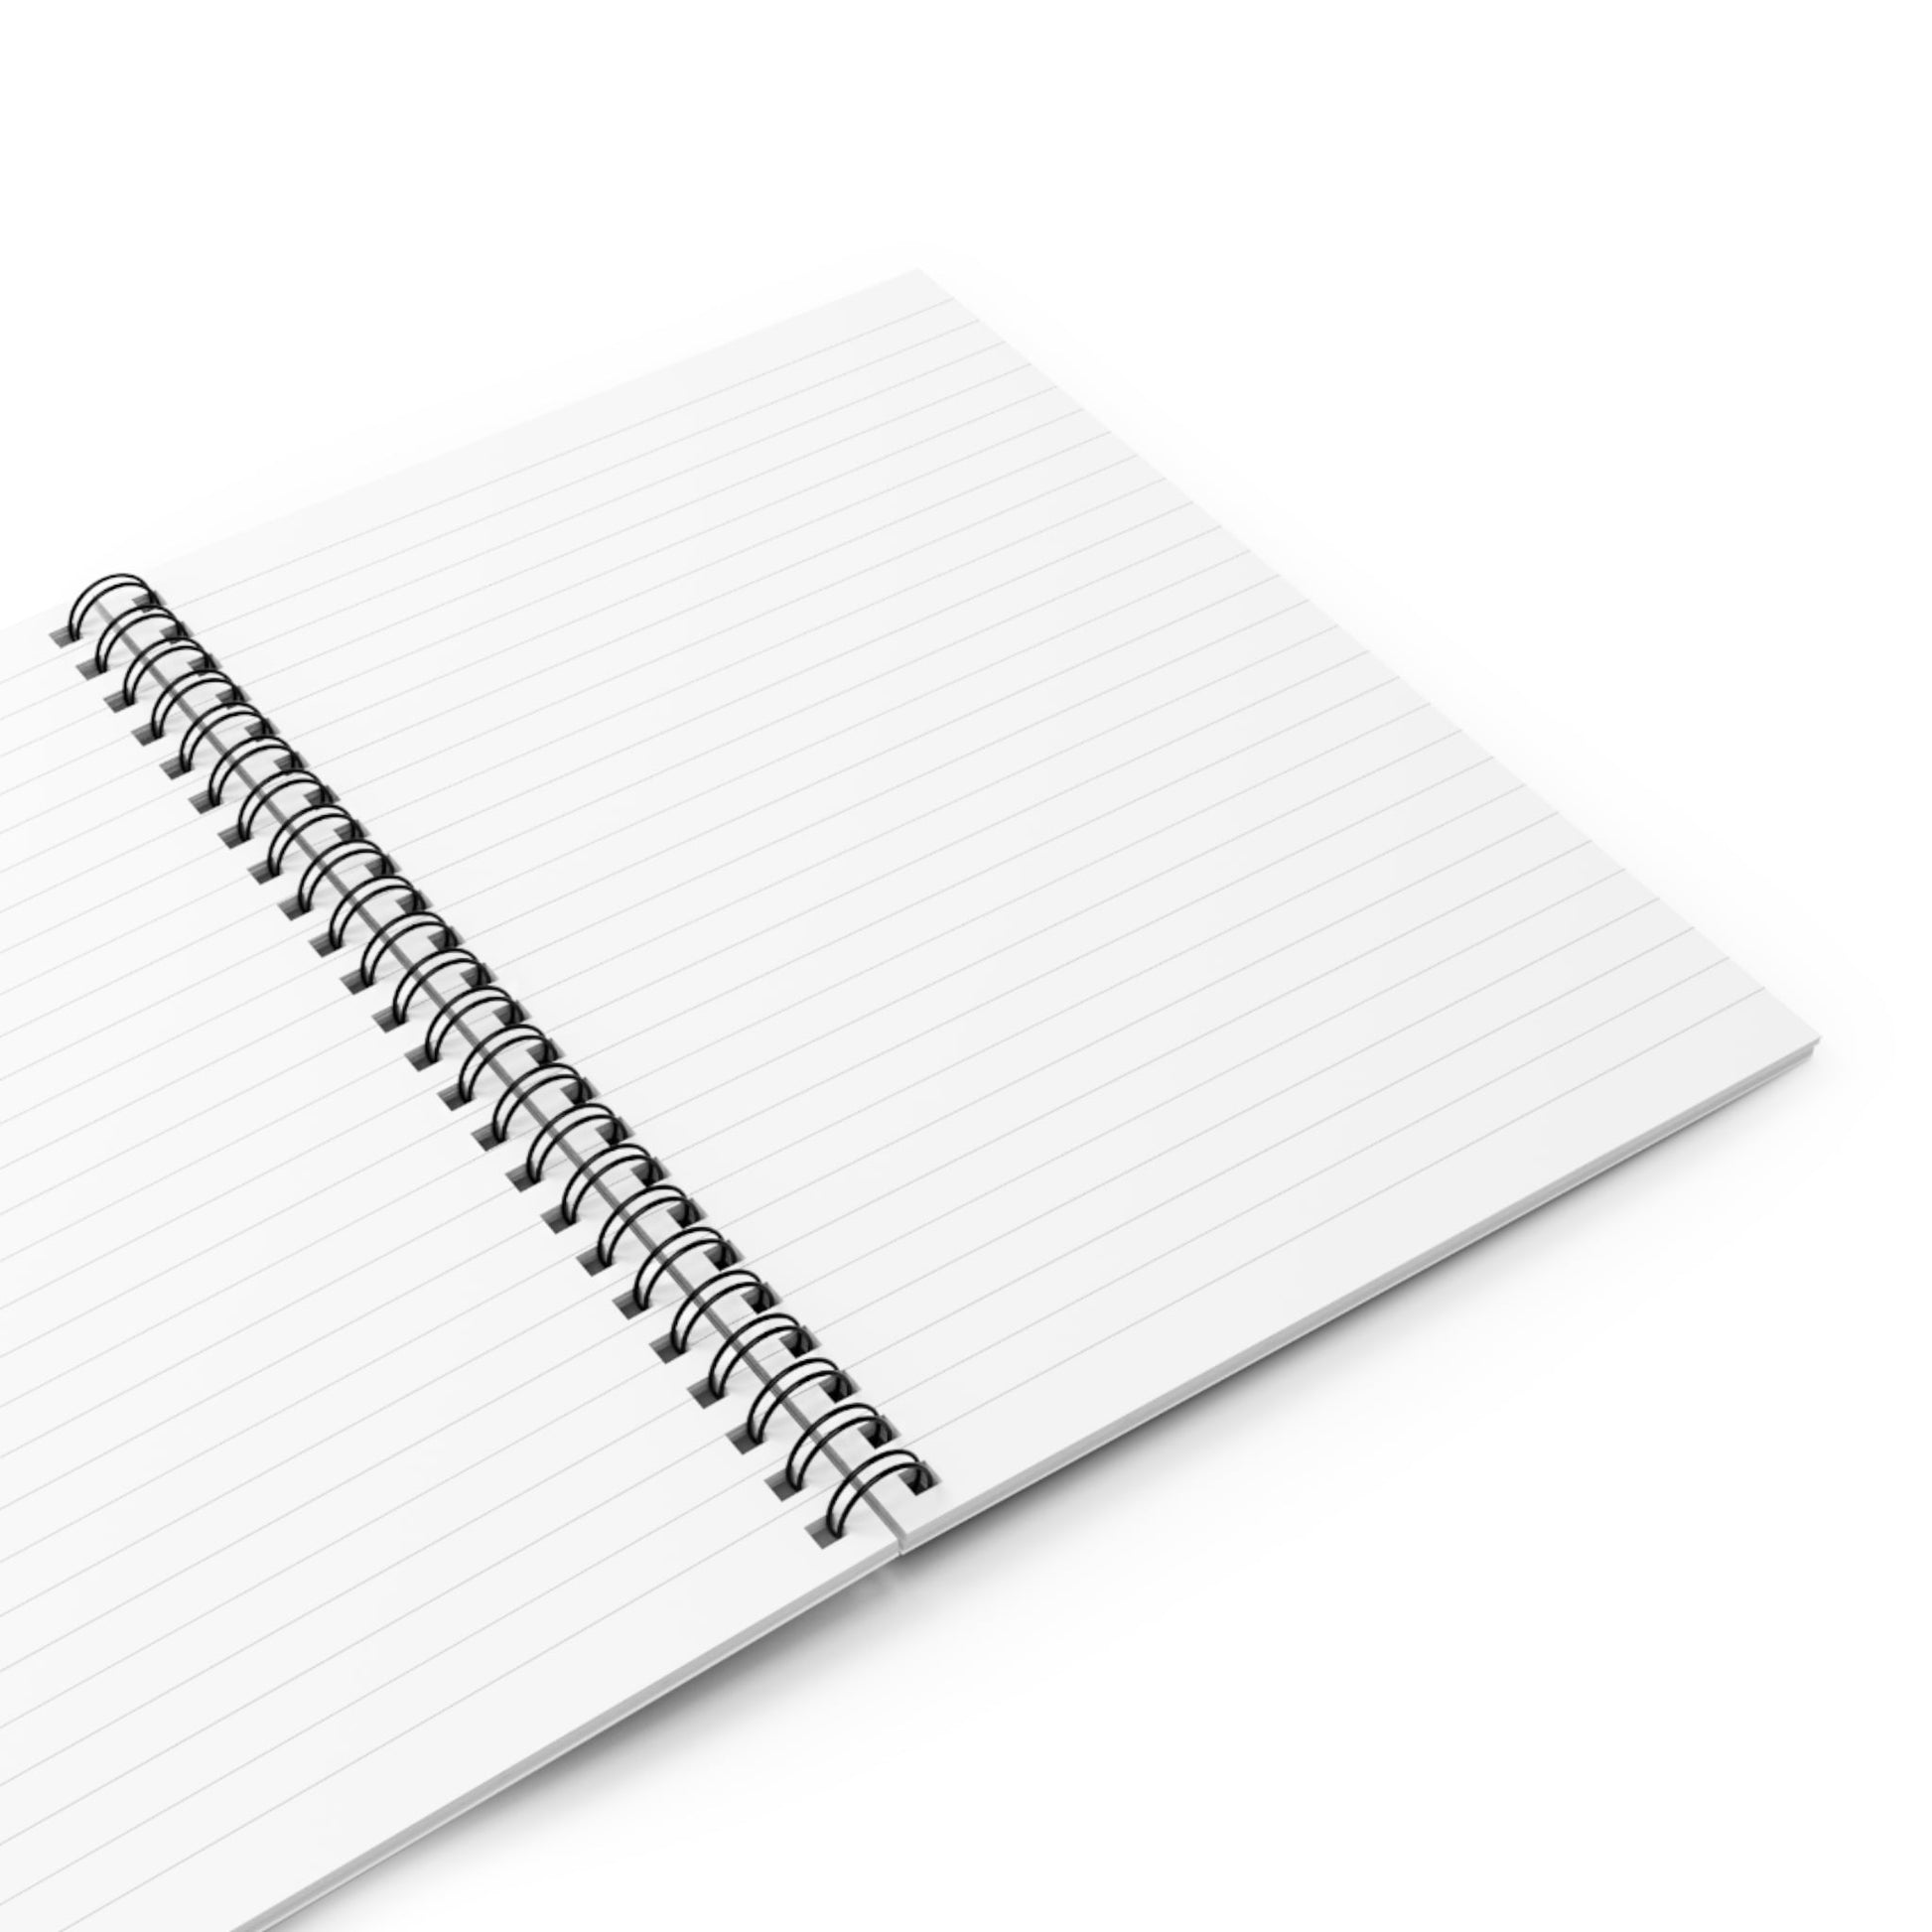 Spiral Notebook with Whimsical Cover Opened with Blank White College Ruled Pages